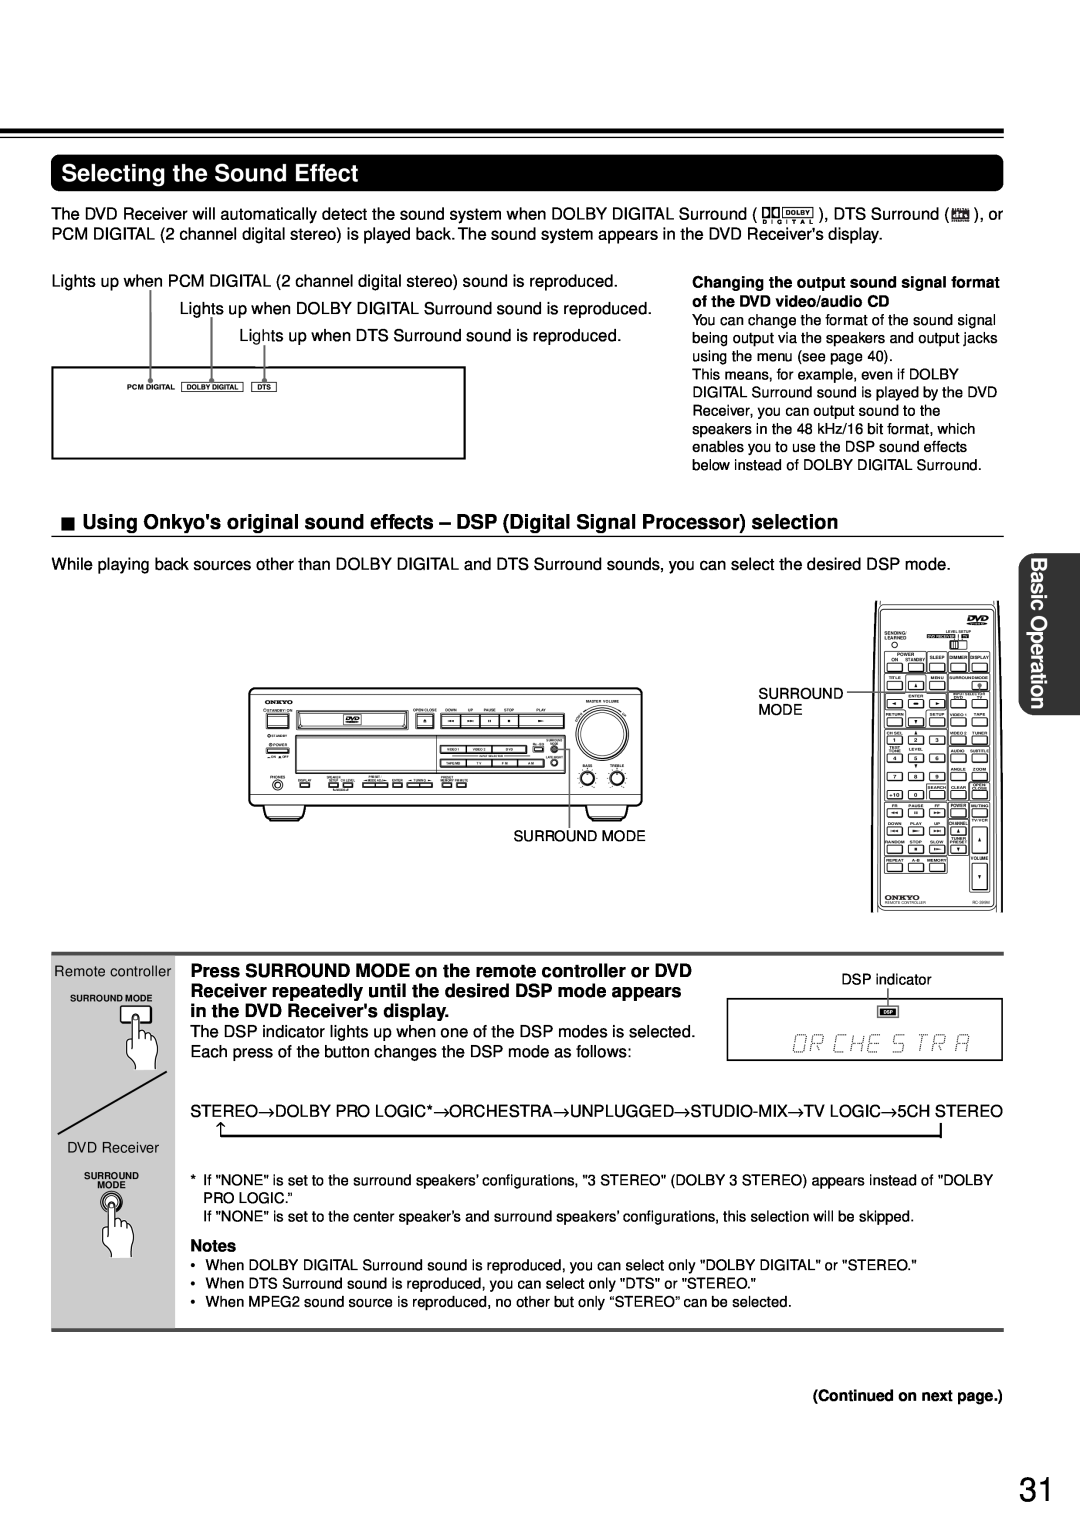 Onkyo DR-90 instruction manual Selecting the Sound Effect, Basic, Operation, in the DVD Receivers display 